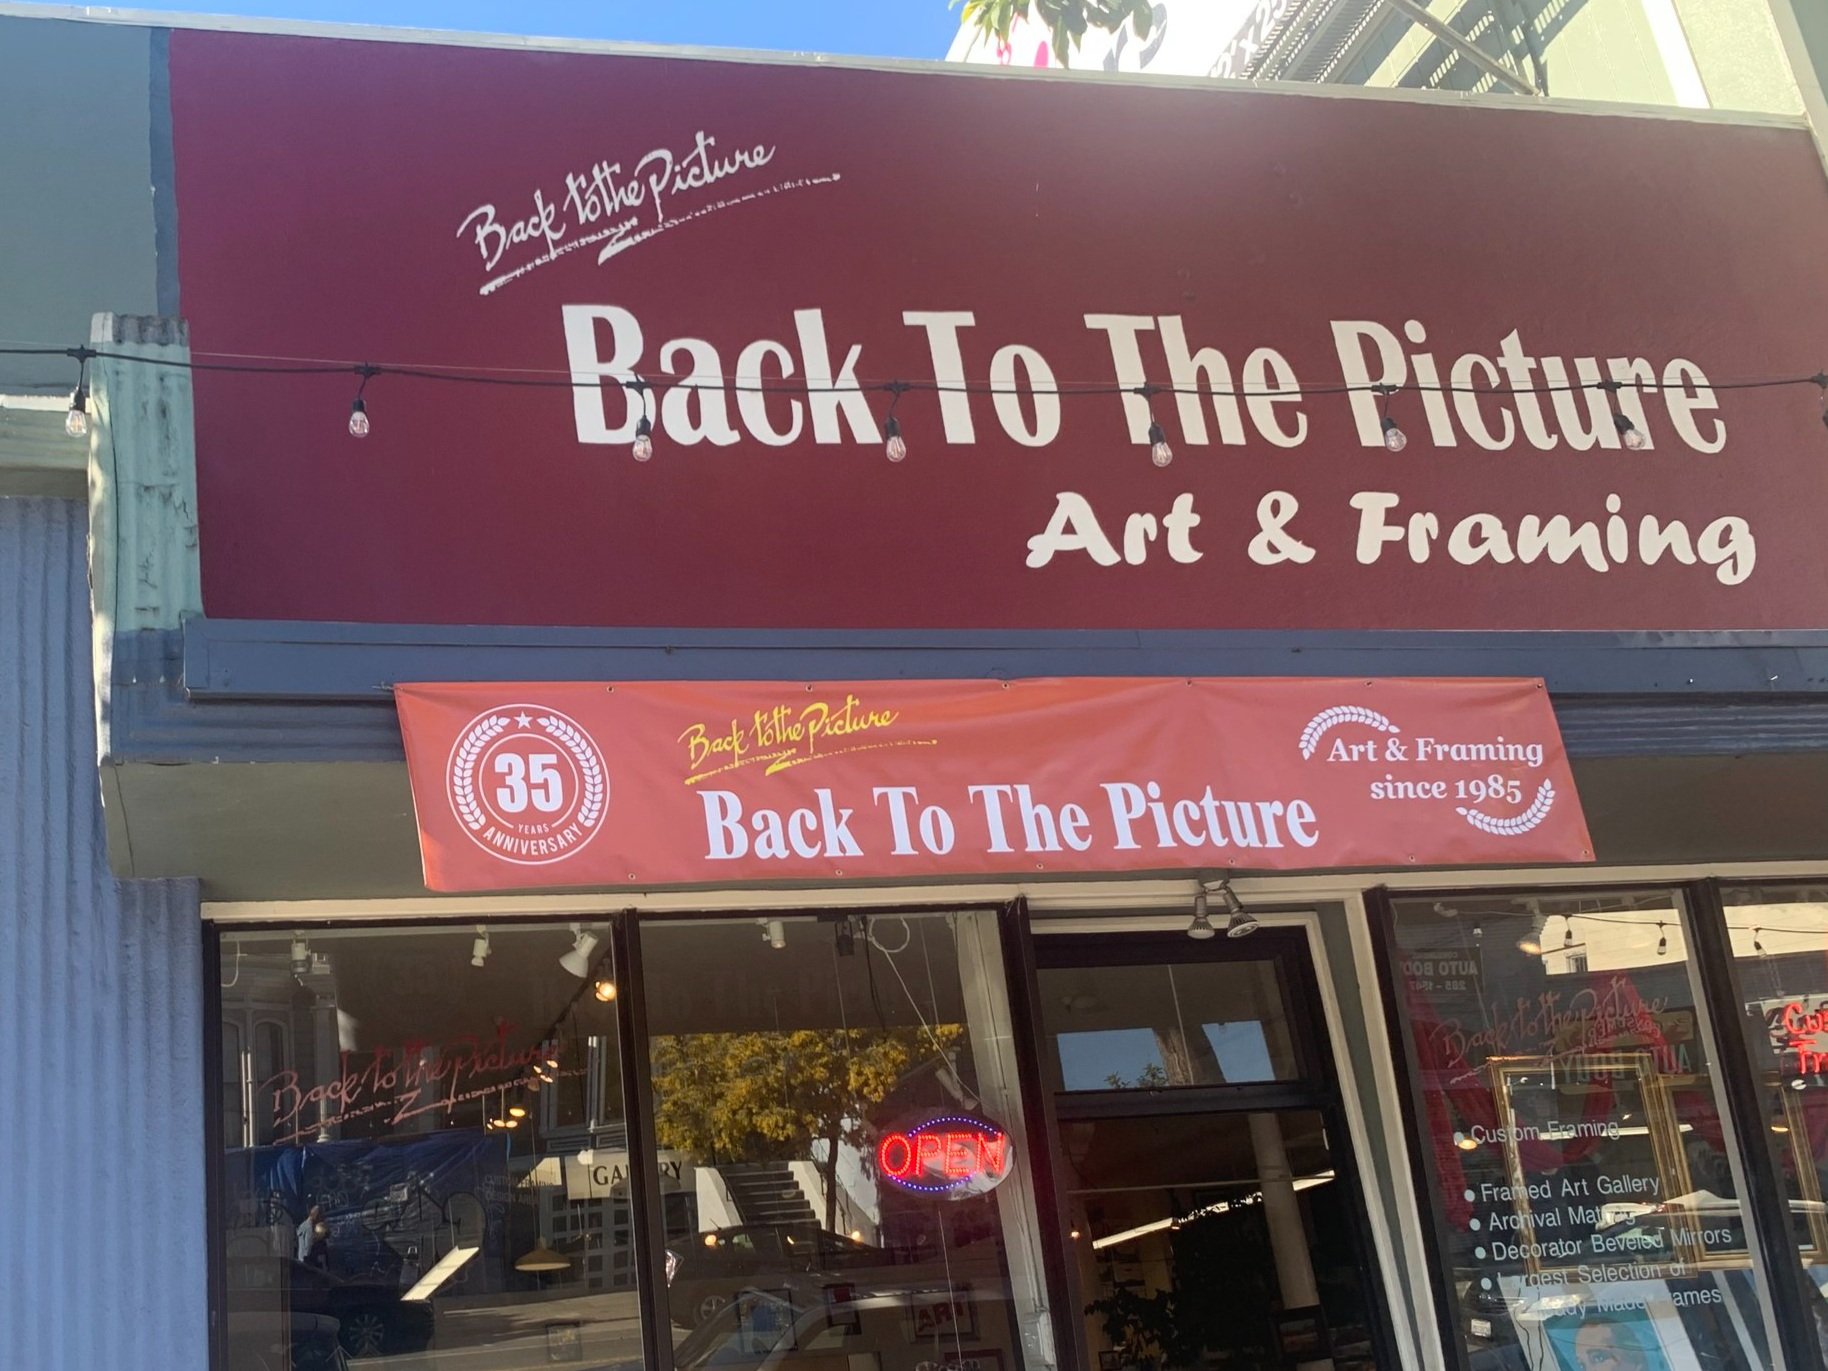 Back+to+the+Picture+image_50426113.jpg